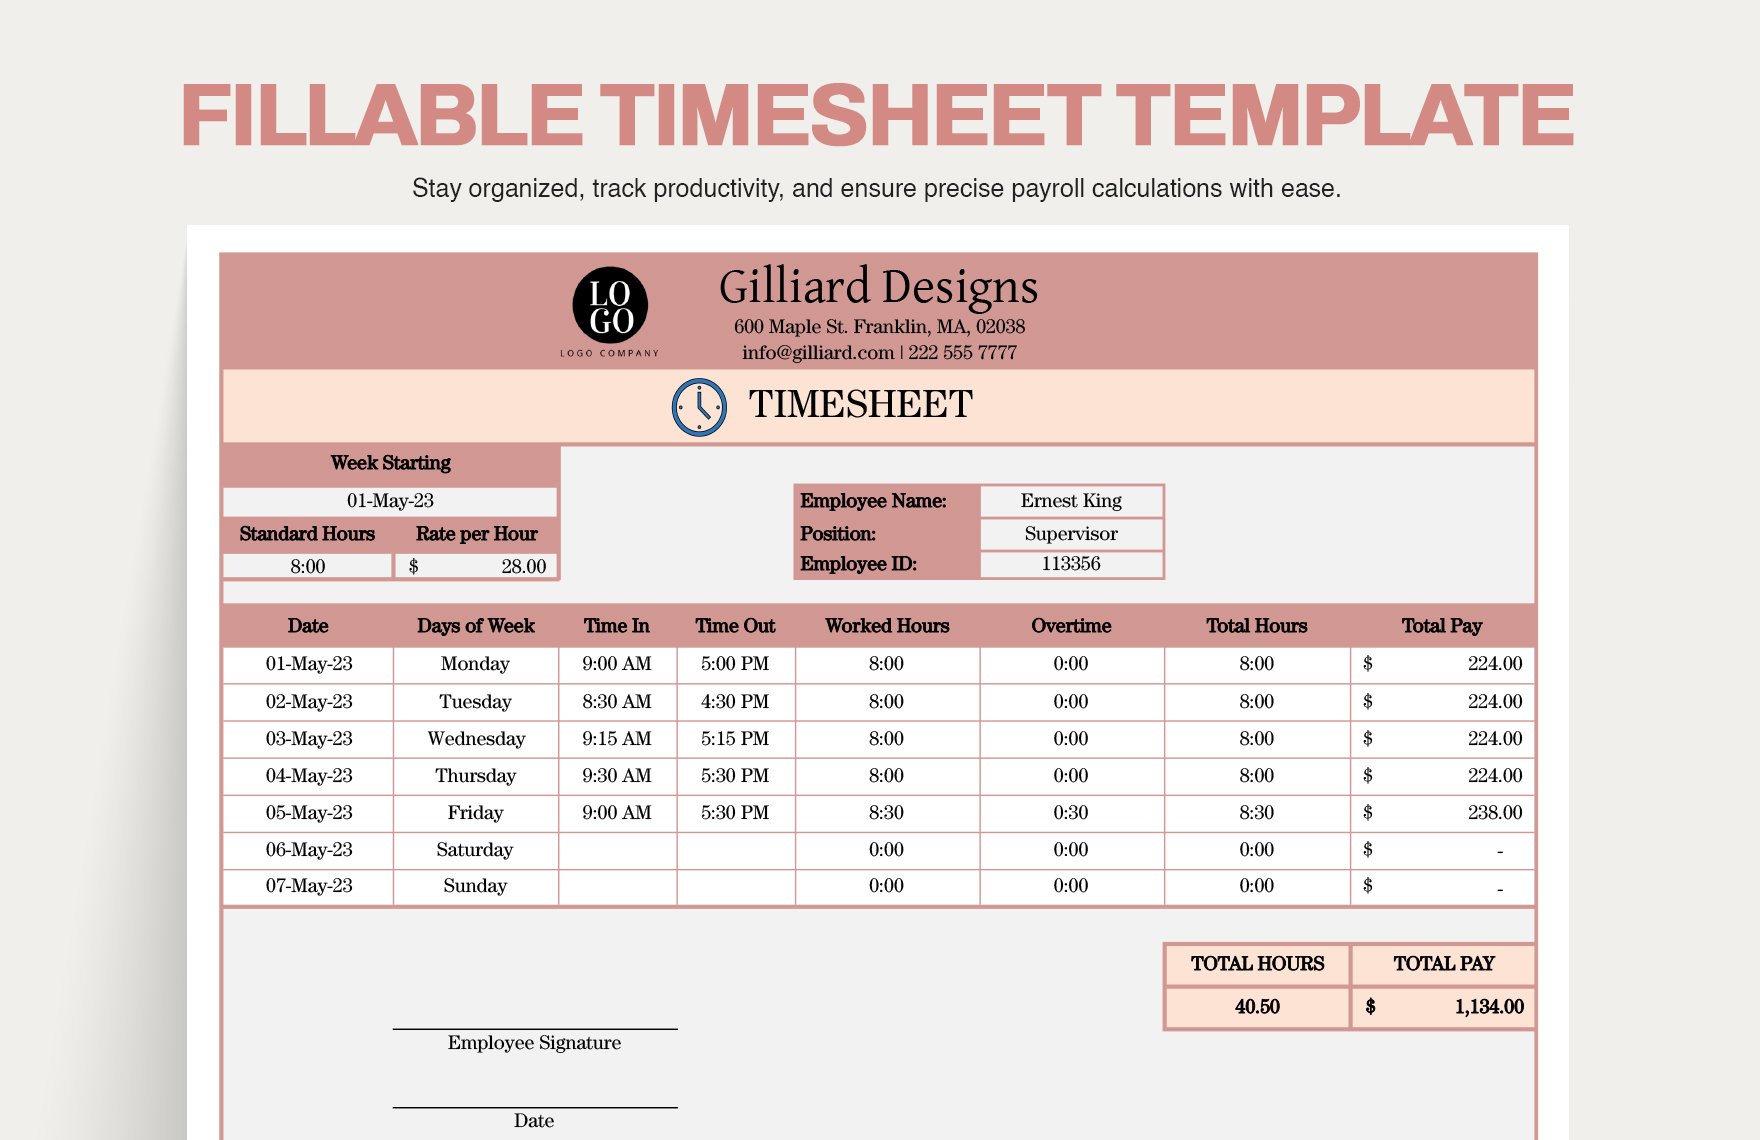 Fillable Timesheet Template in Excel, Google Sheets